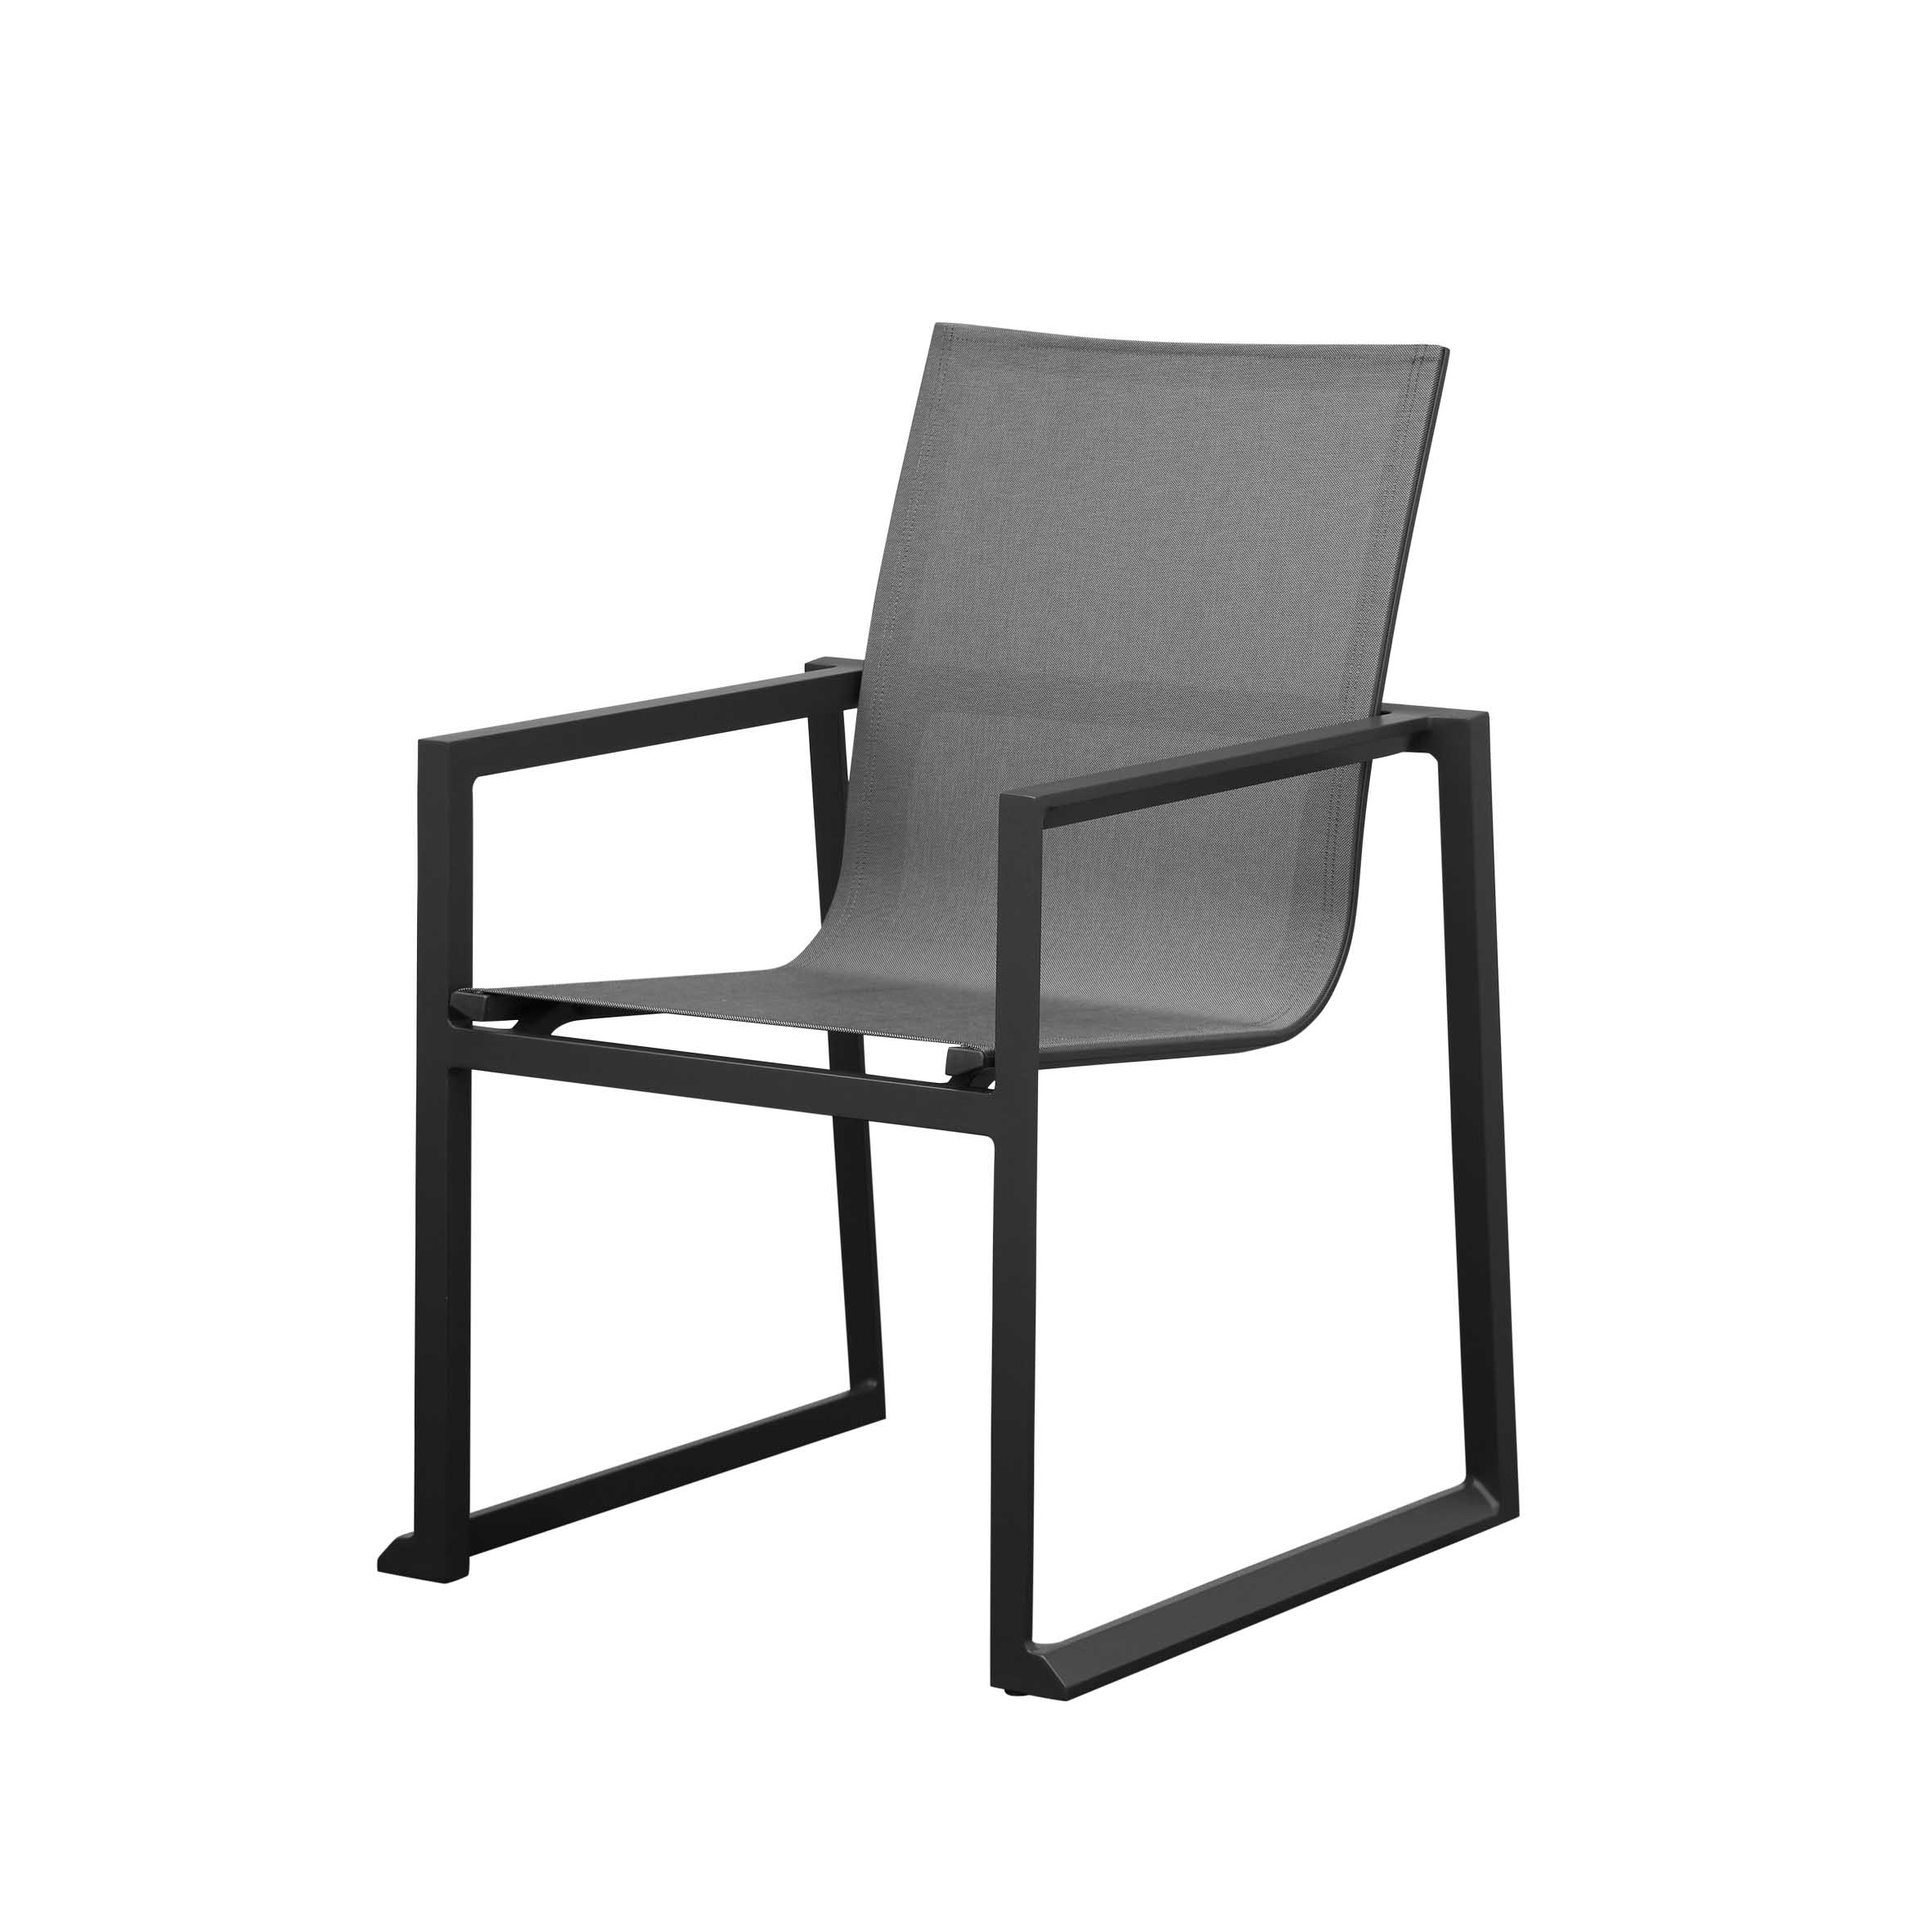 Zeus sling dining chair S1